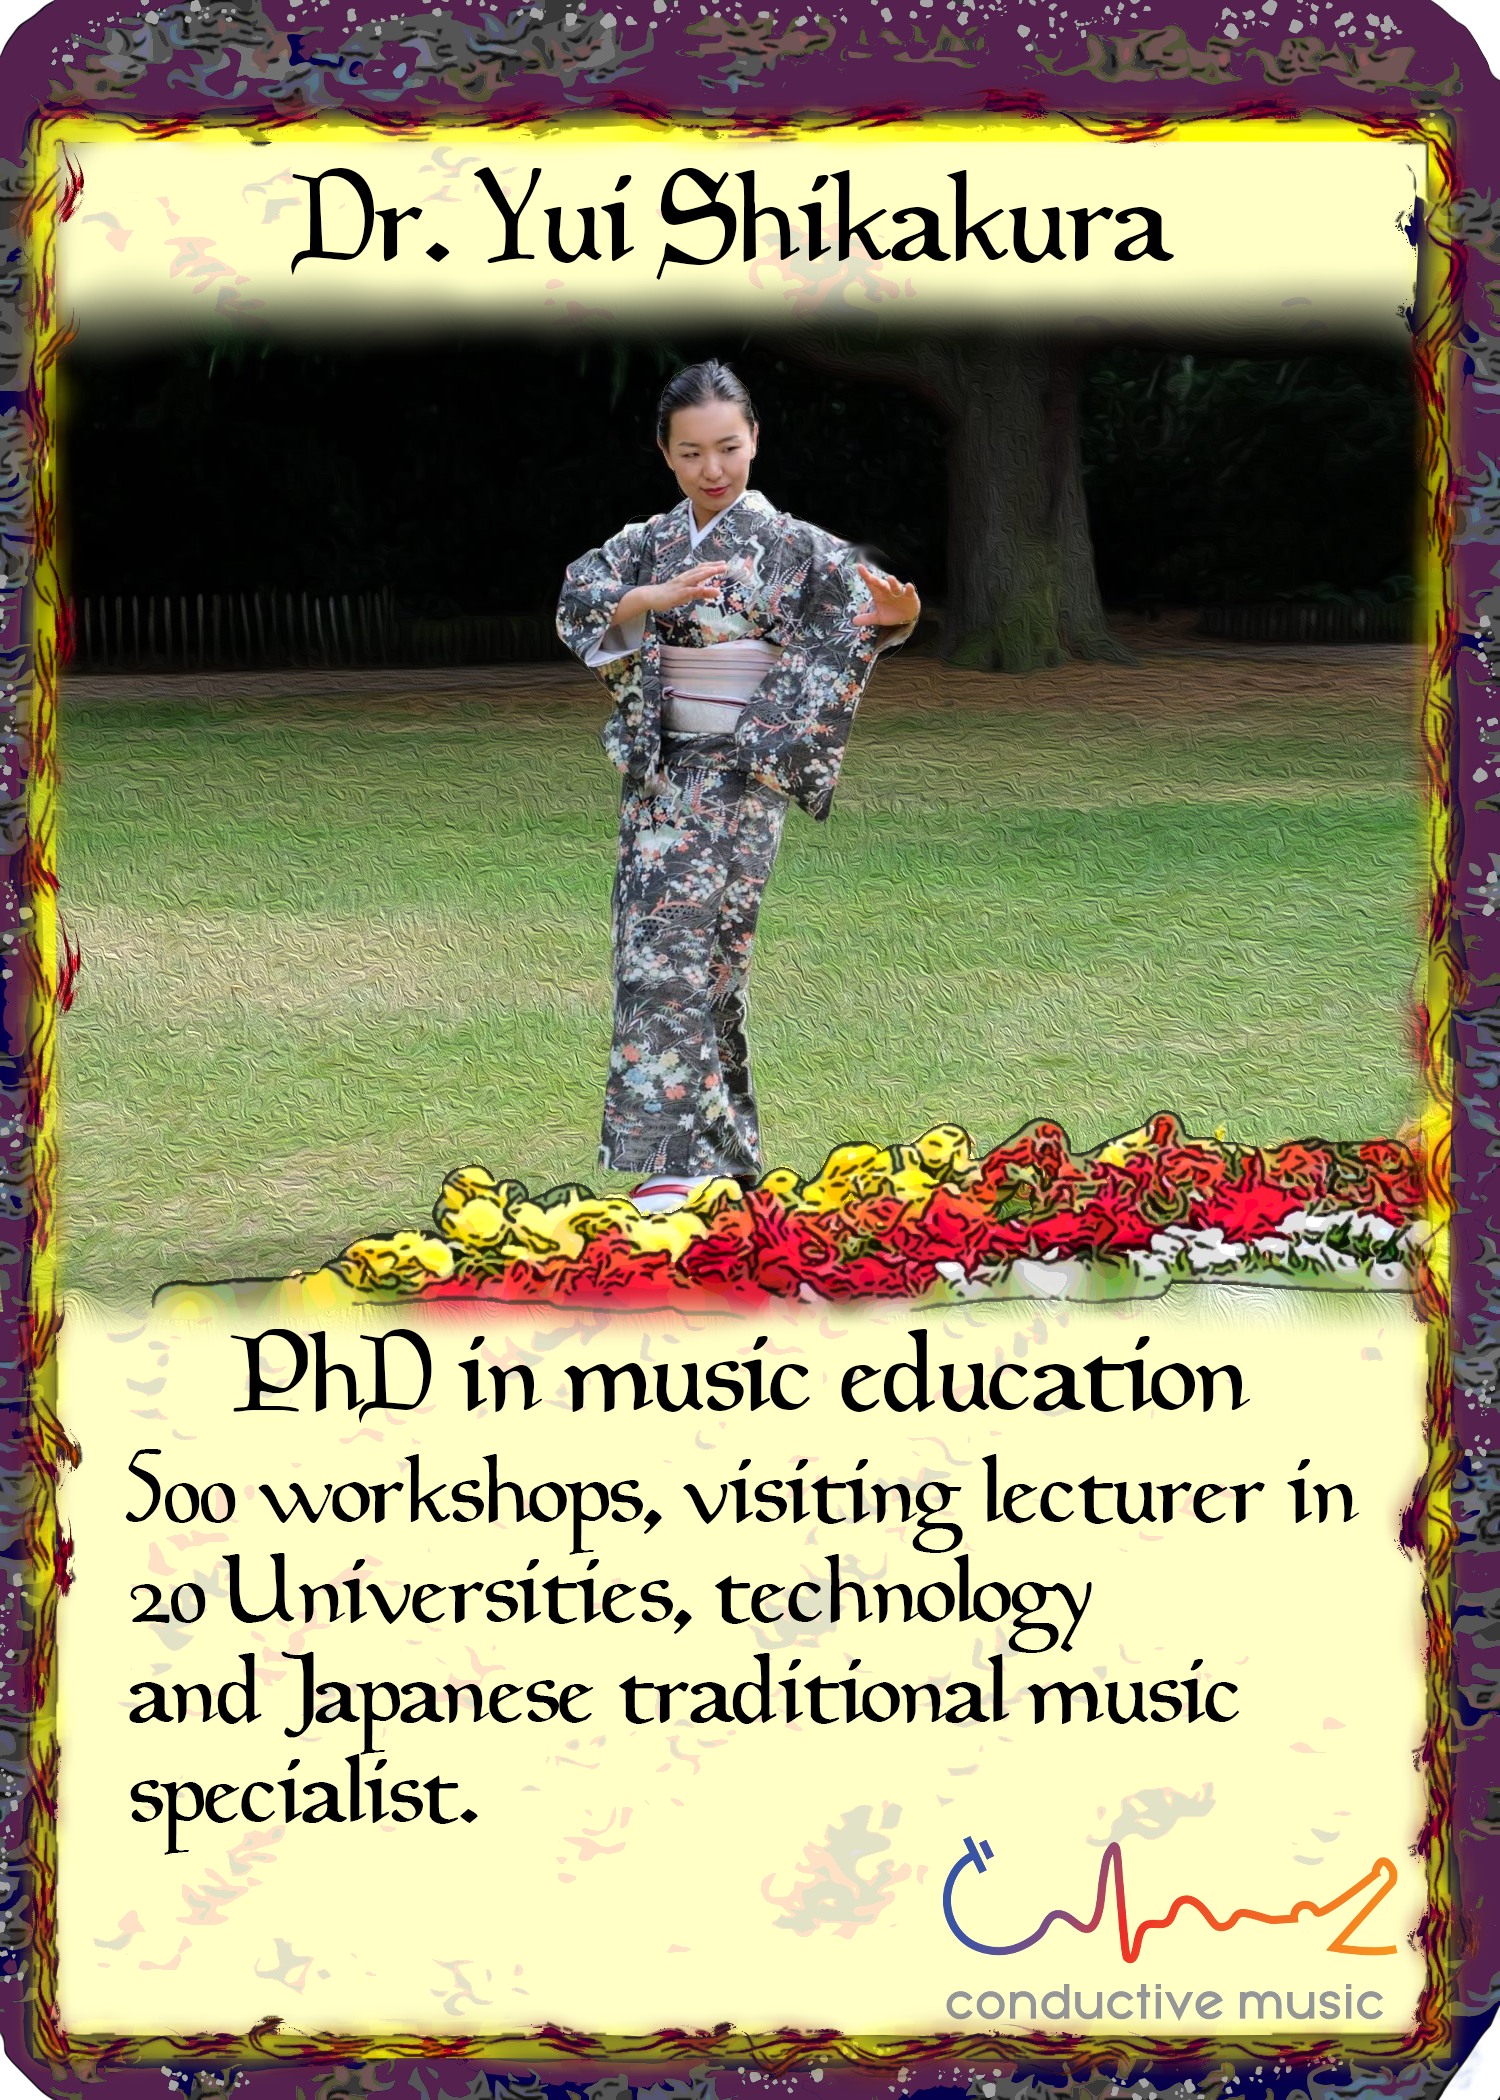 Dr. Yui Shikakura. PhD in Music Education, 500 workshops, visiting lecturer in 20+ Universities, technology and Japanese traditional music specialist